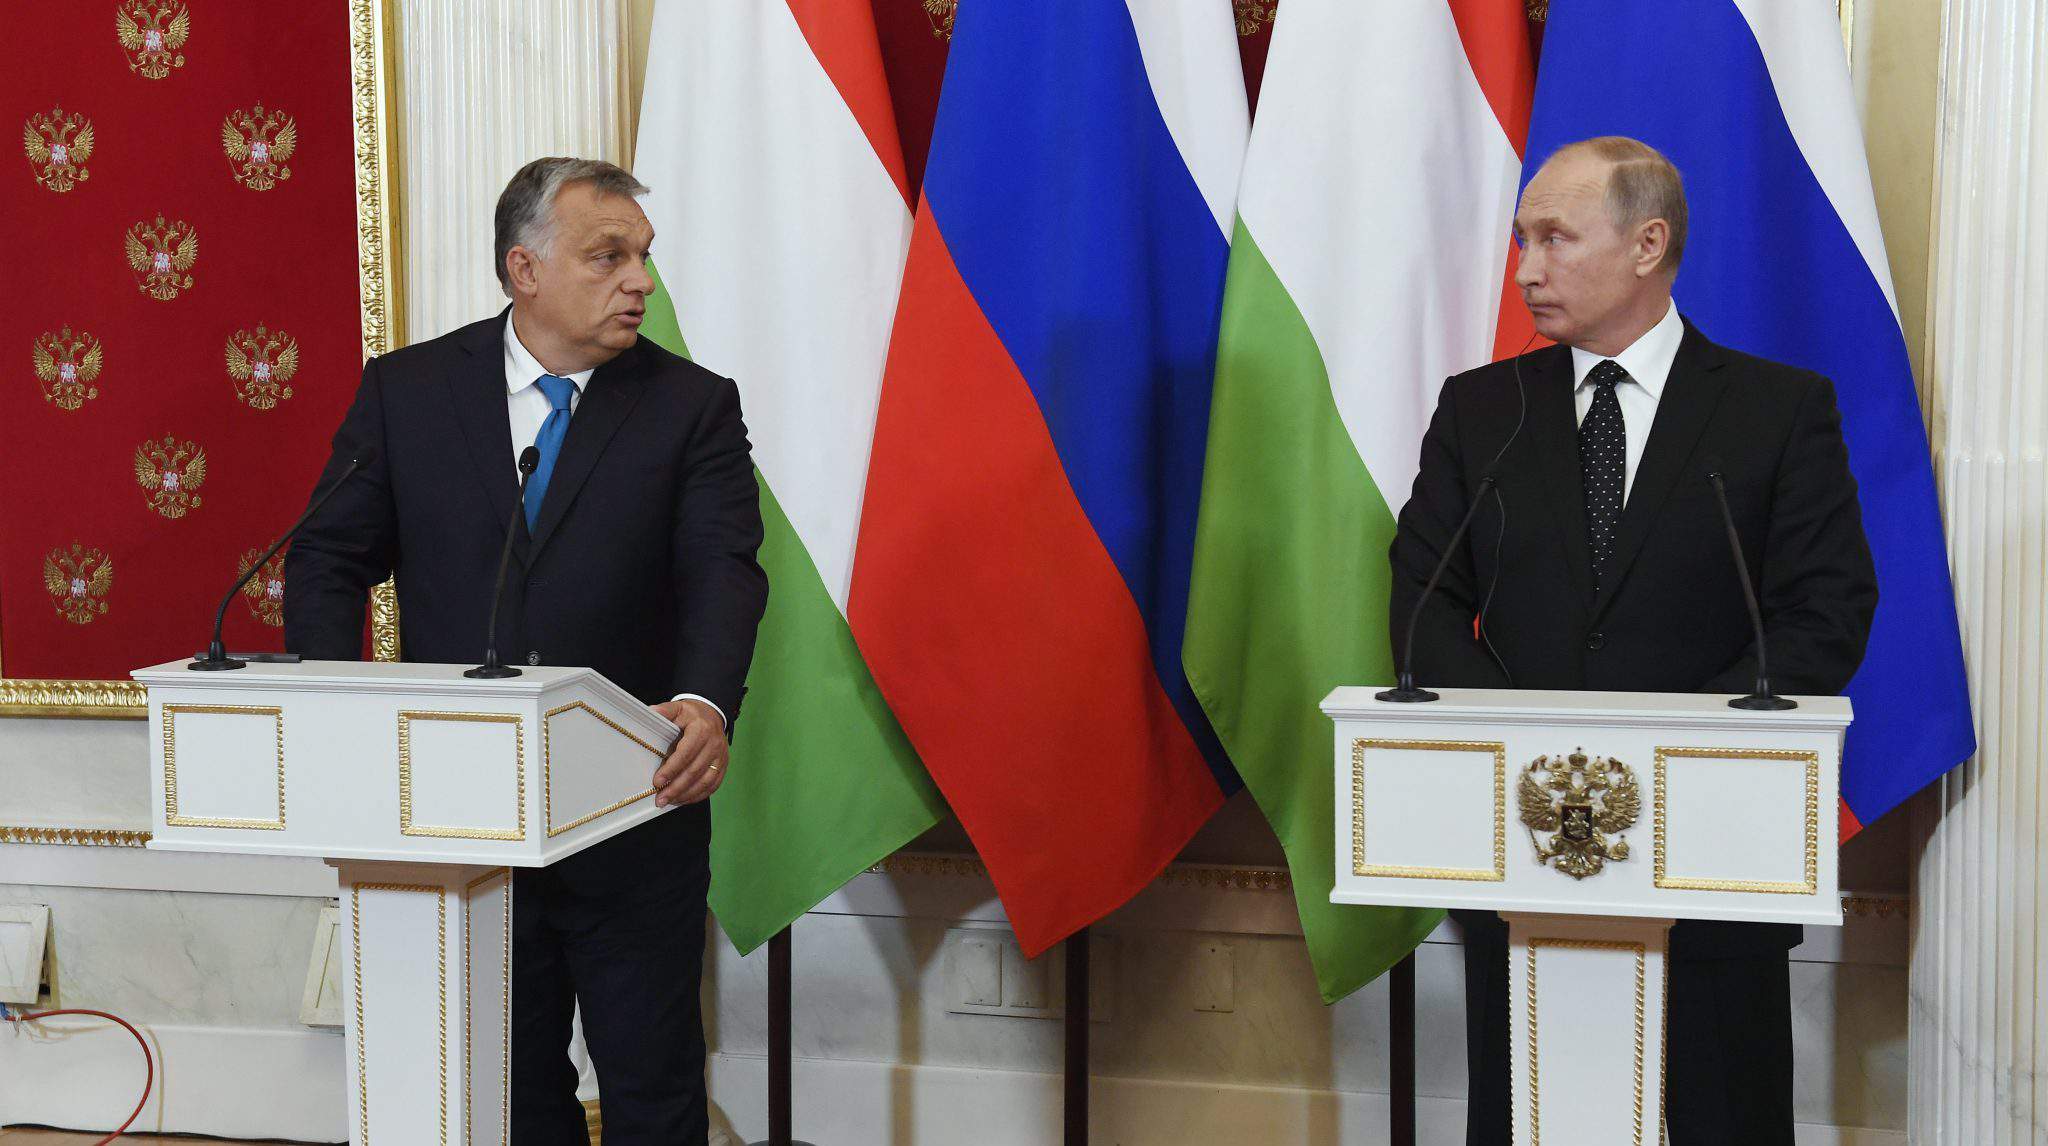 Orbán in Russia with Putin